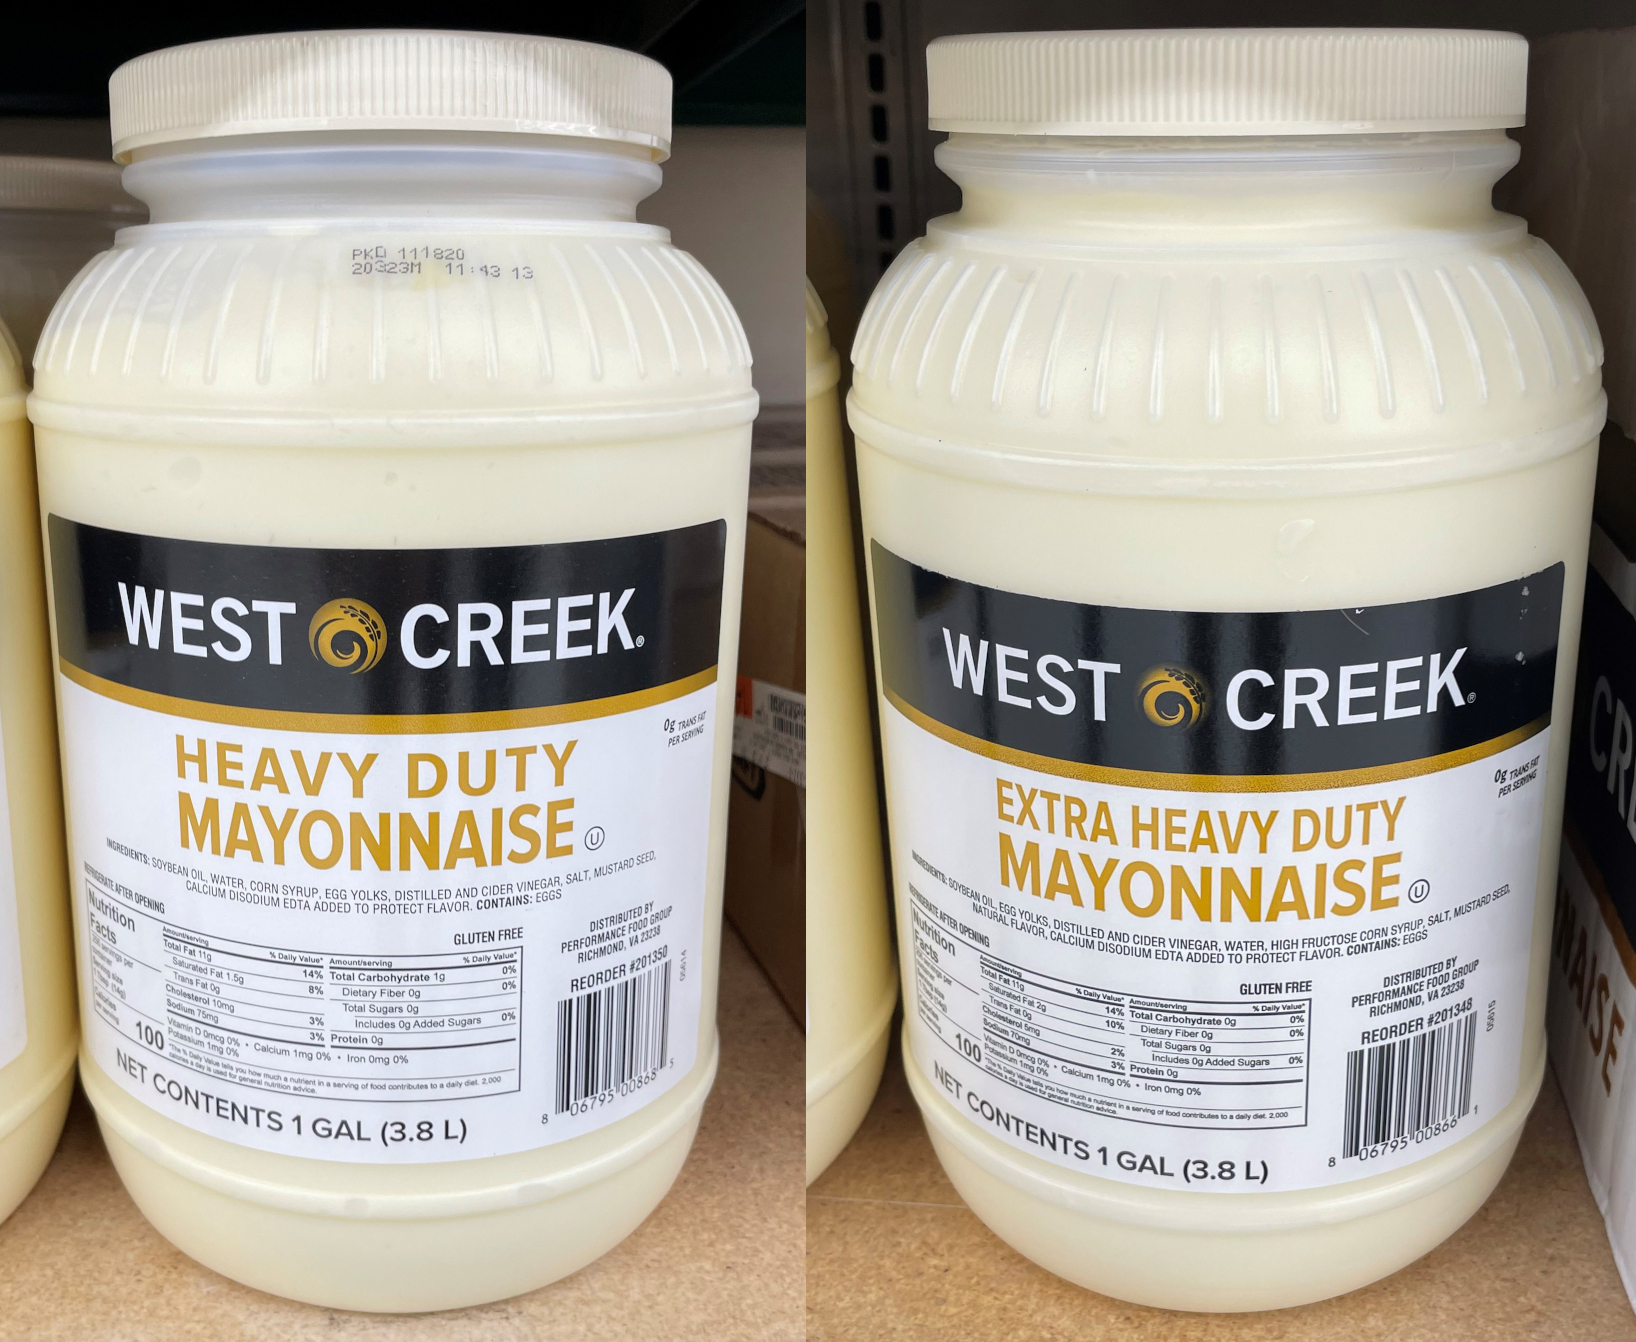 Mayo classification is a thing, apparently.